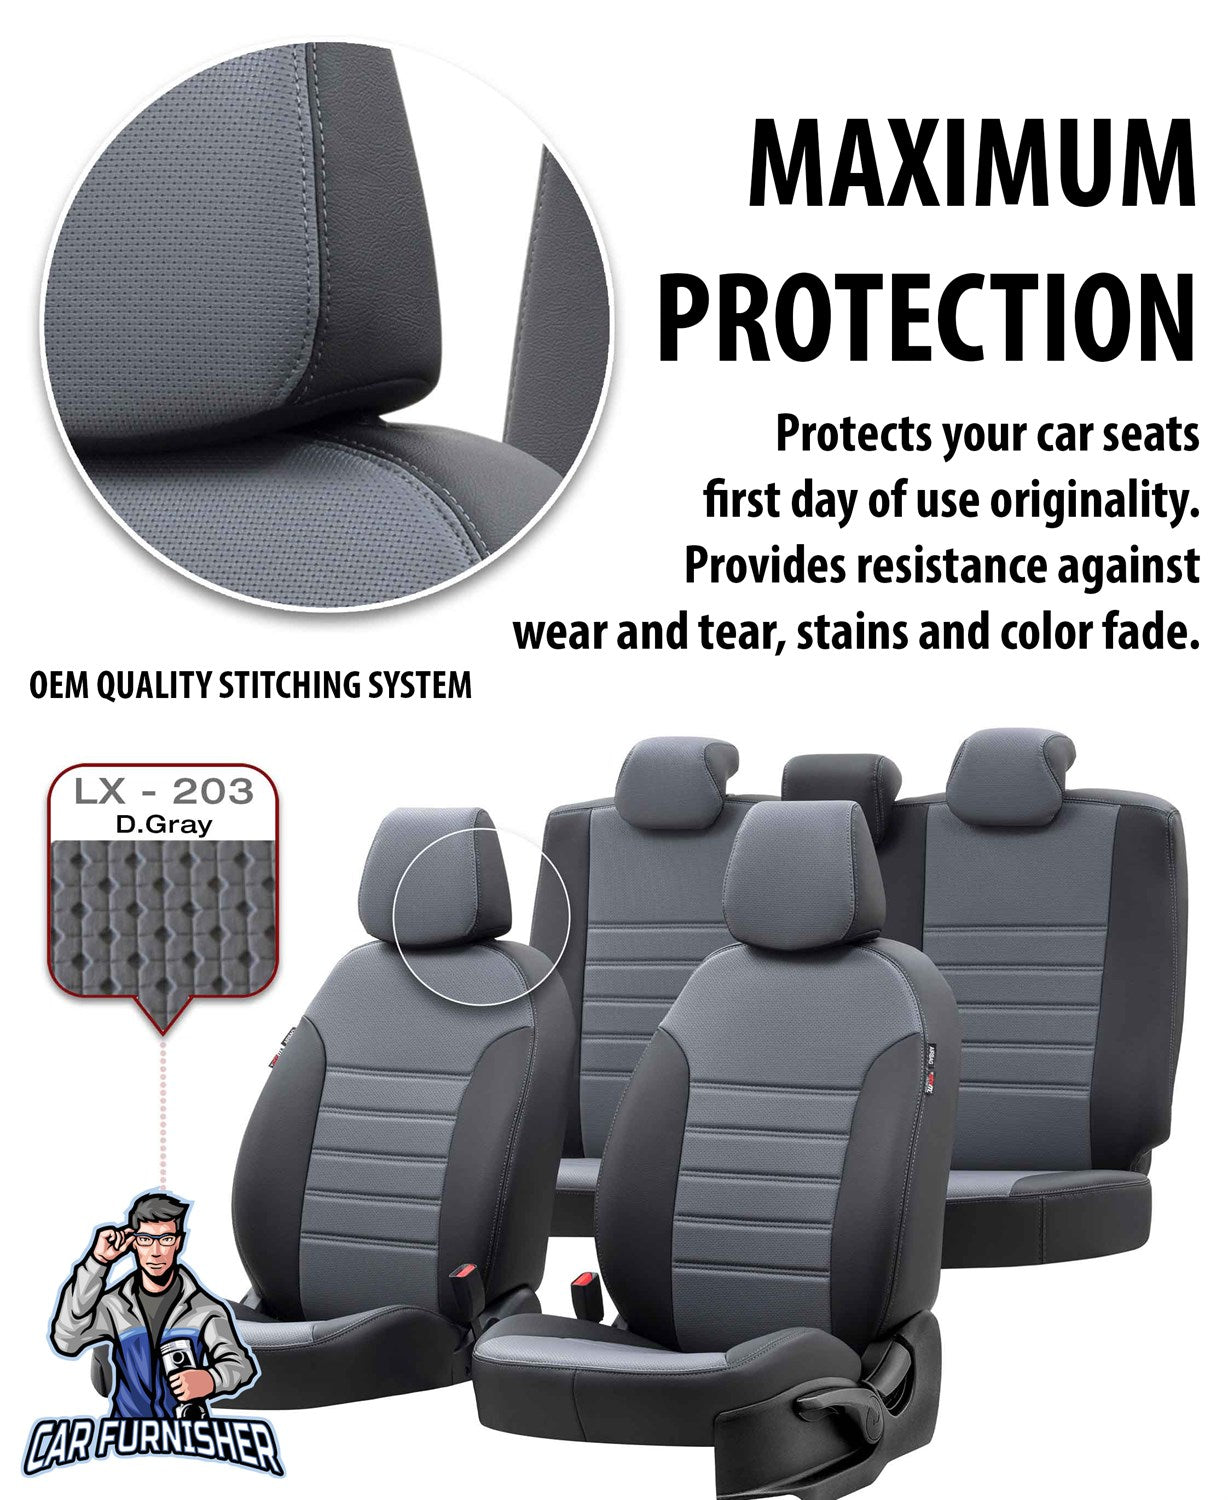 Iveco Eurocargo Seat Cover New York Leather Design Smoked Black Leather